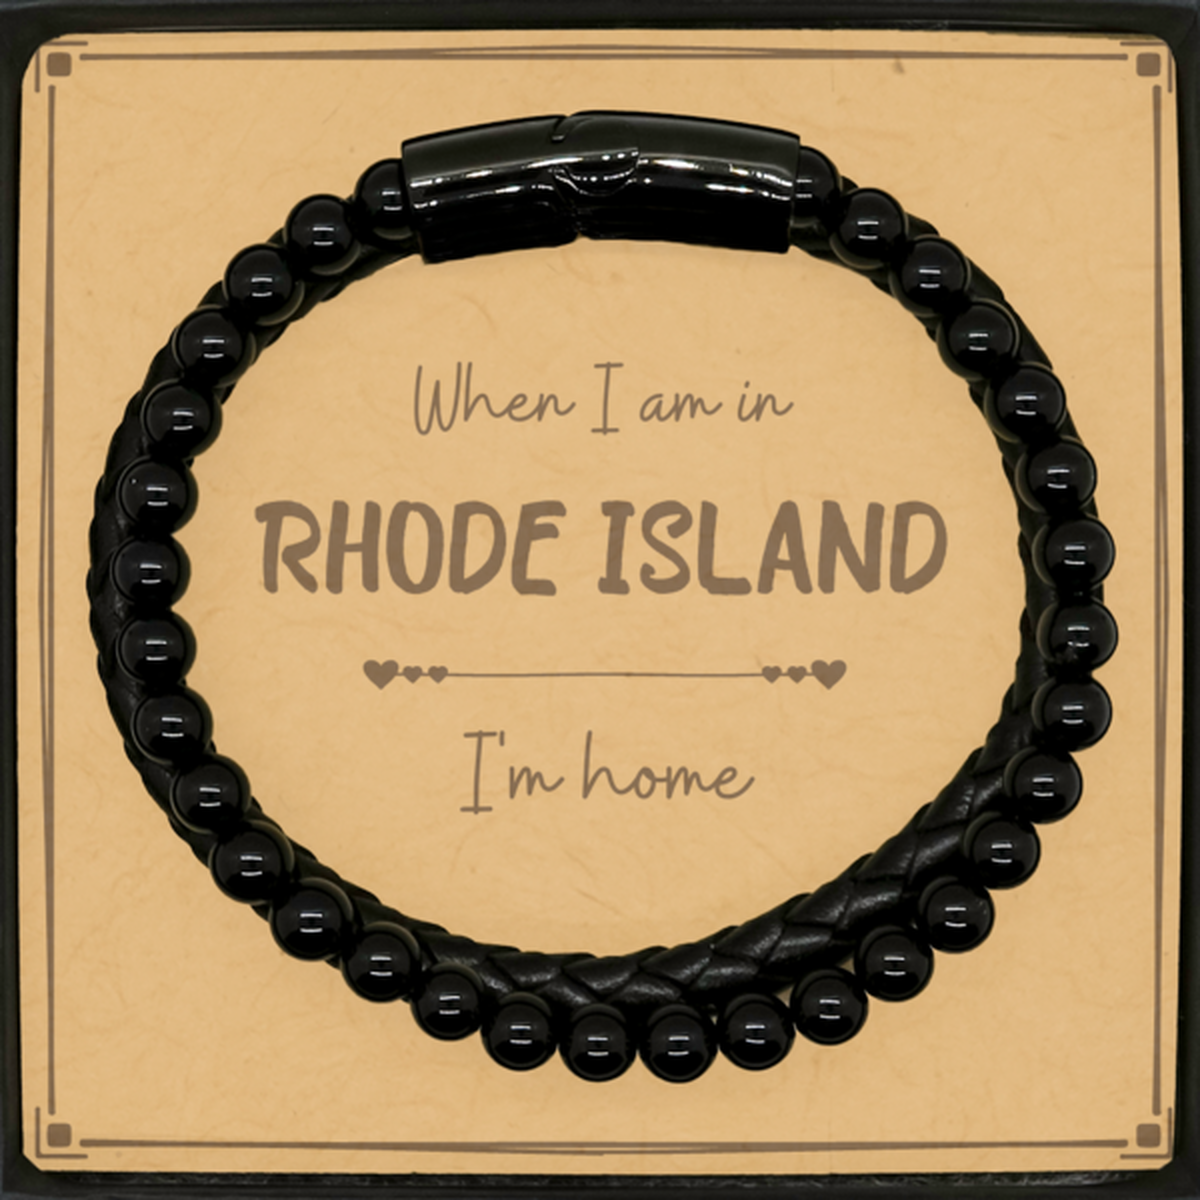 When I am in Rhode Island I'm home Stone Leather Bracelets, Message Card Gifts For Rhode Island, State Rhode Island Birthday Gifts for Friends Coworker